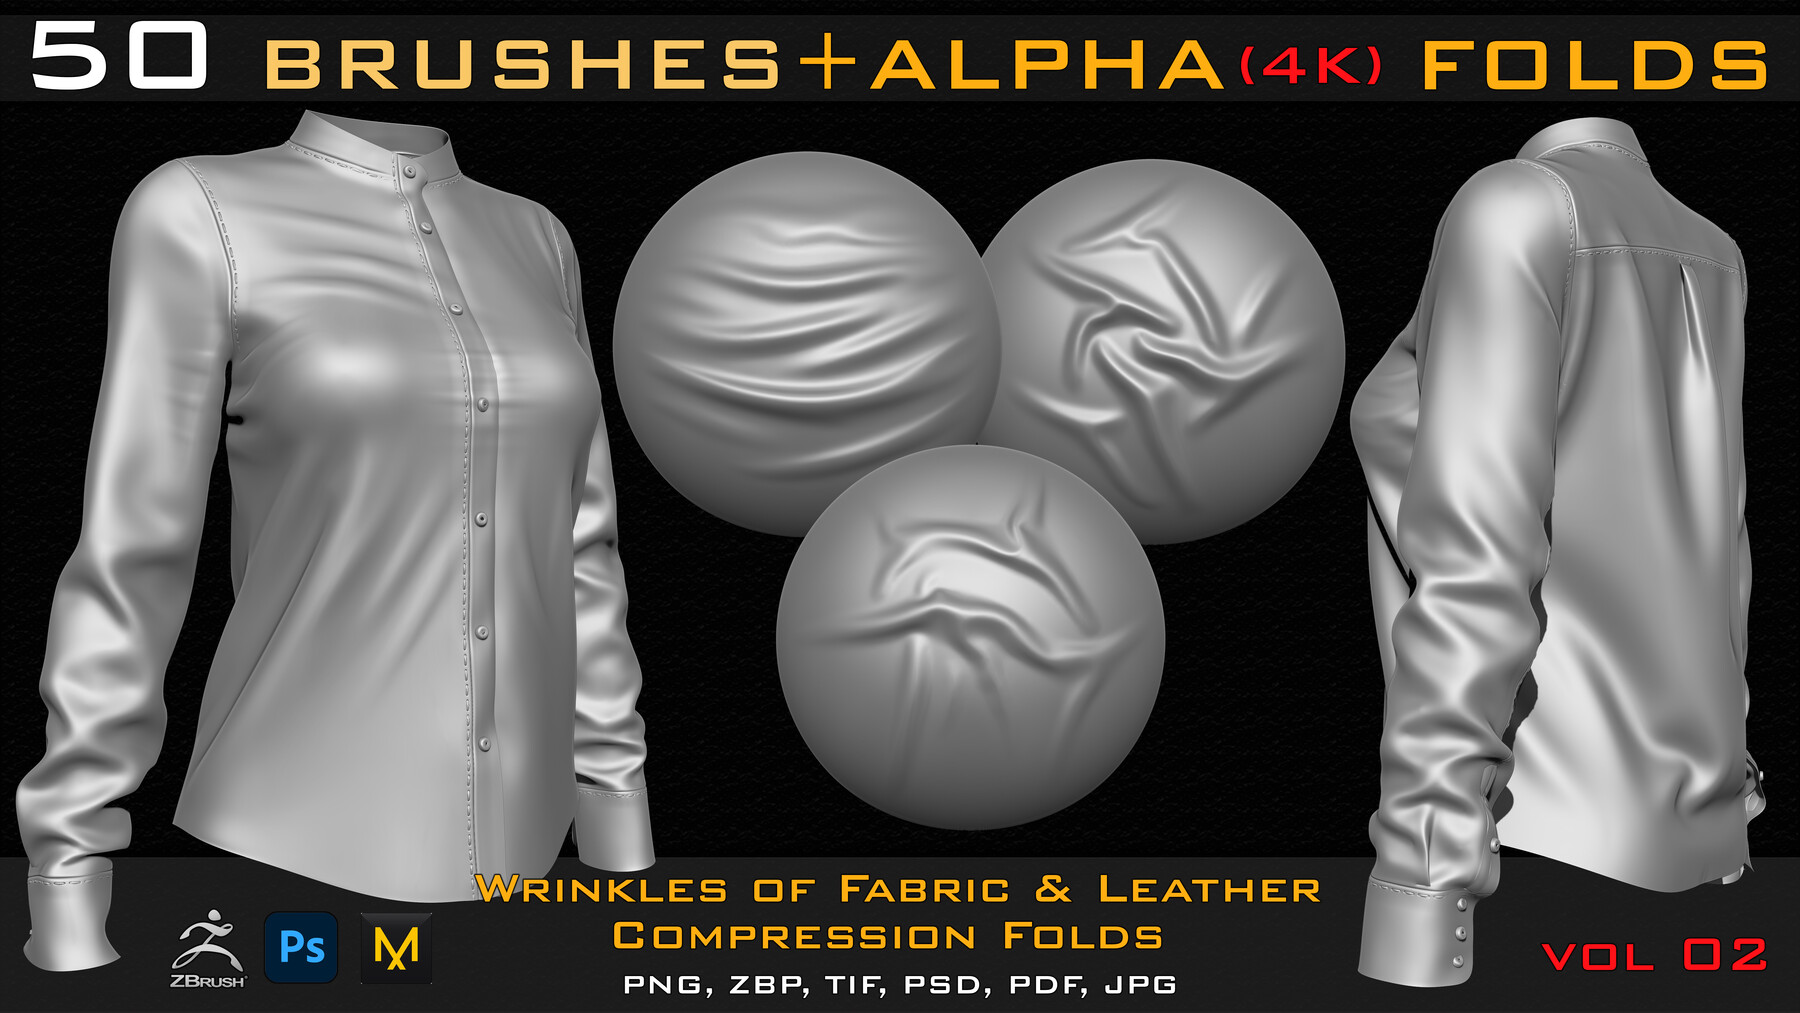 good zbrush brush for clothes